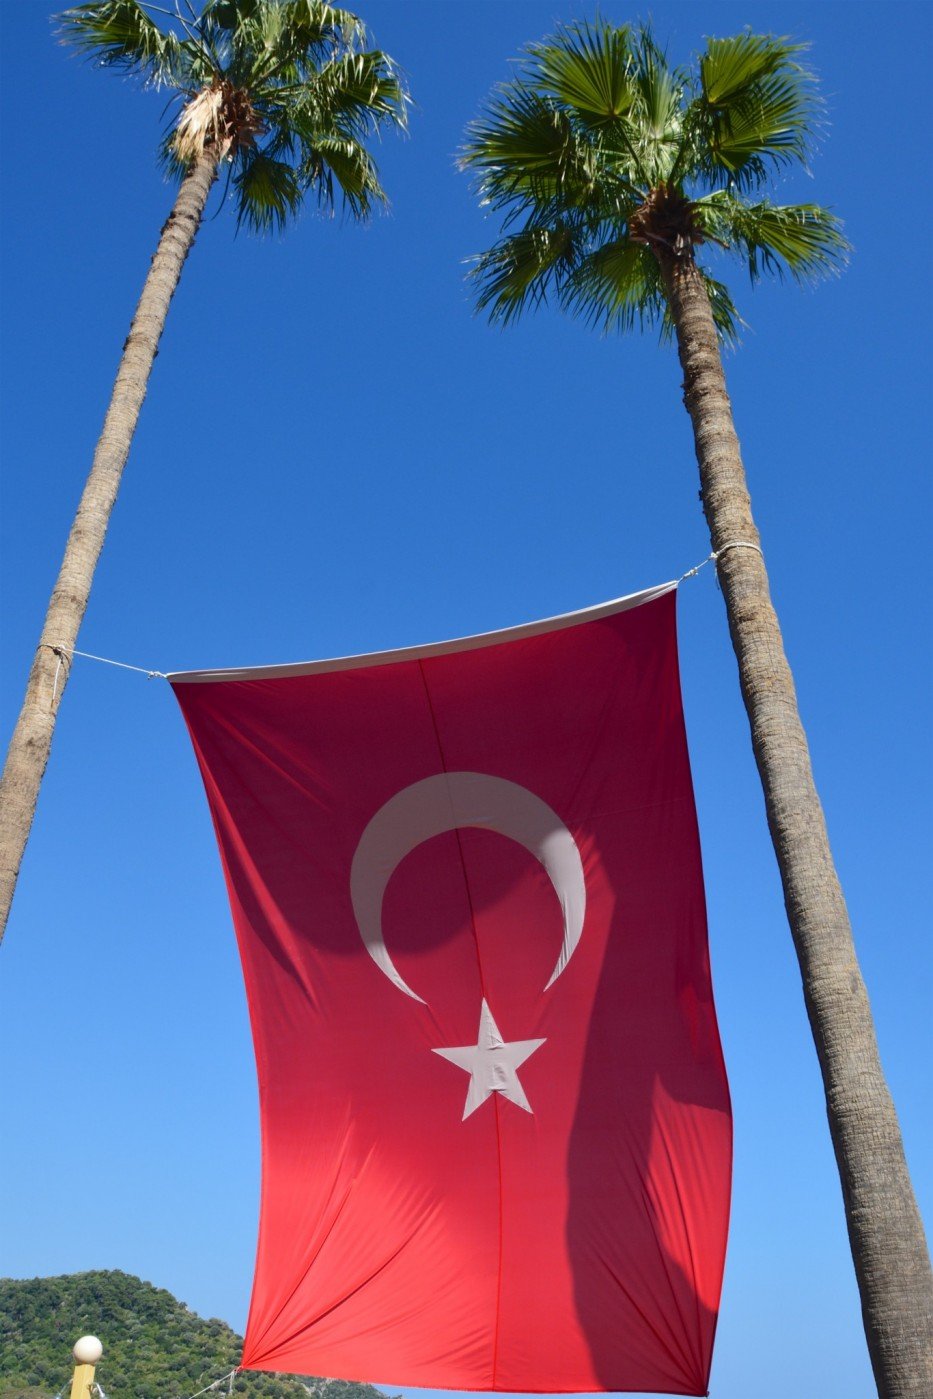 Our thoughts in Turkey – Marmaris